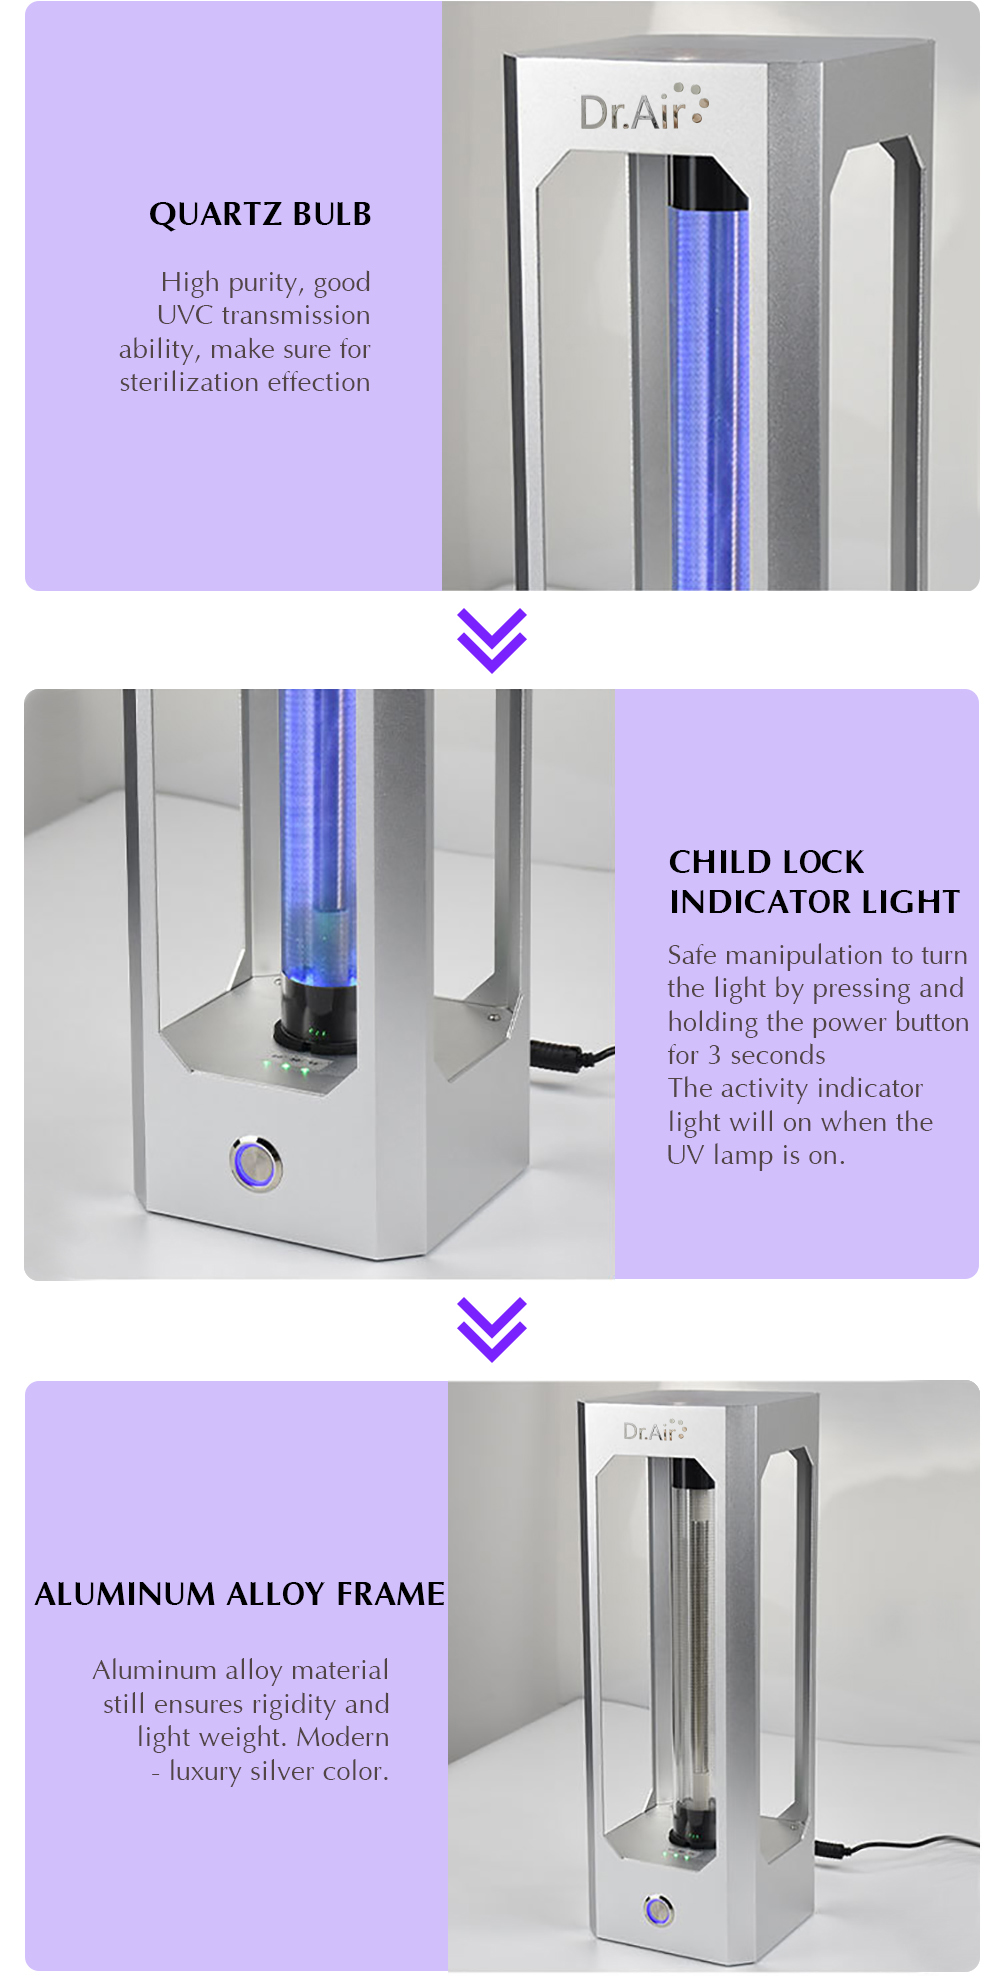 Dr.Air FELIX-222nm Antibacterial Disinfection Lamp using UV-222nm light to ensures both effective air sterilization and absolute safety 